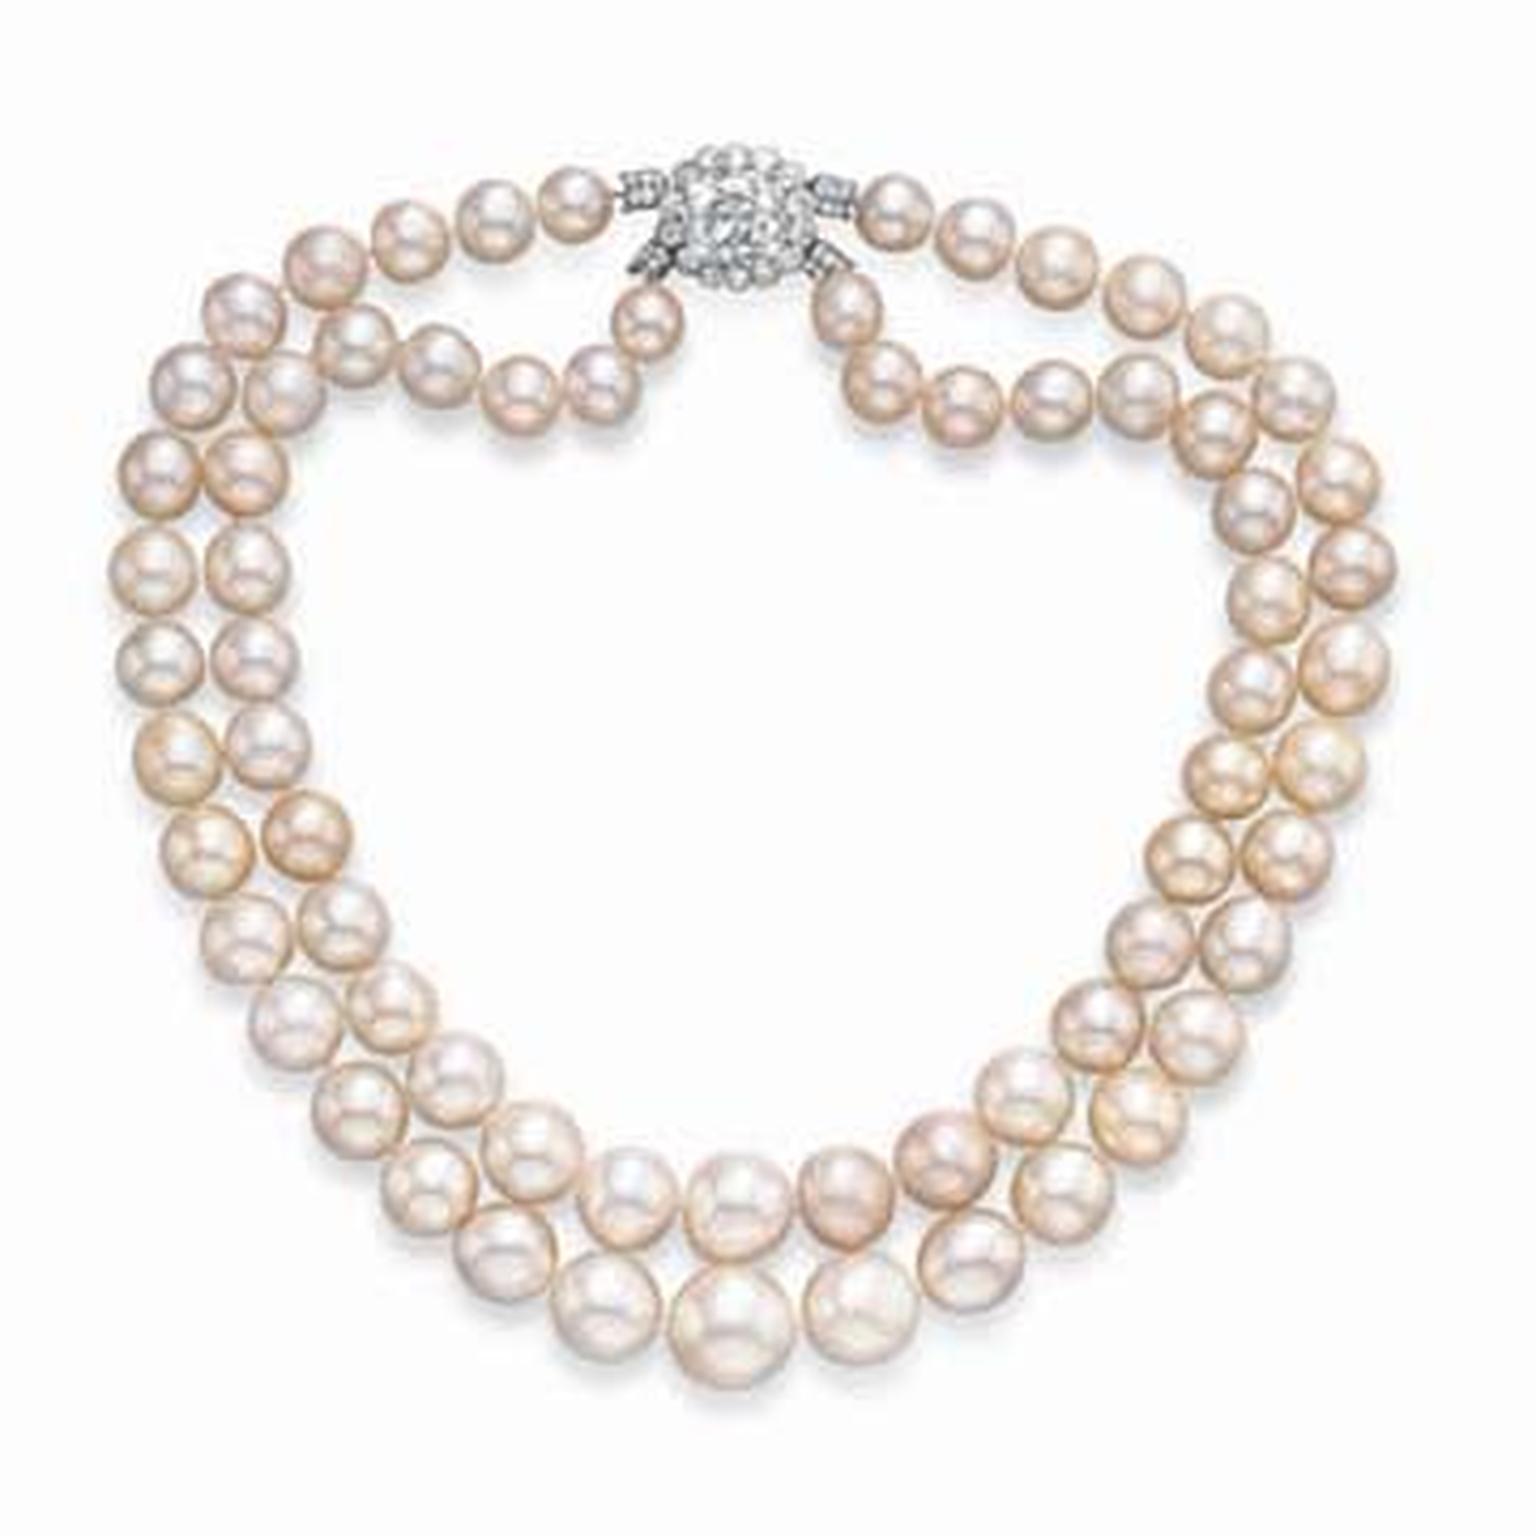 Cartier Baroda two-strand natural pearl necklace